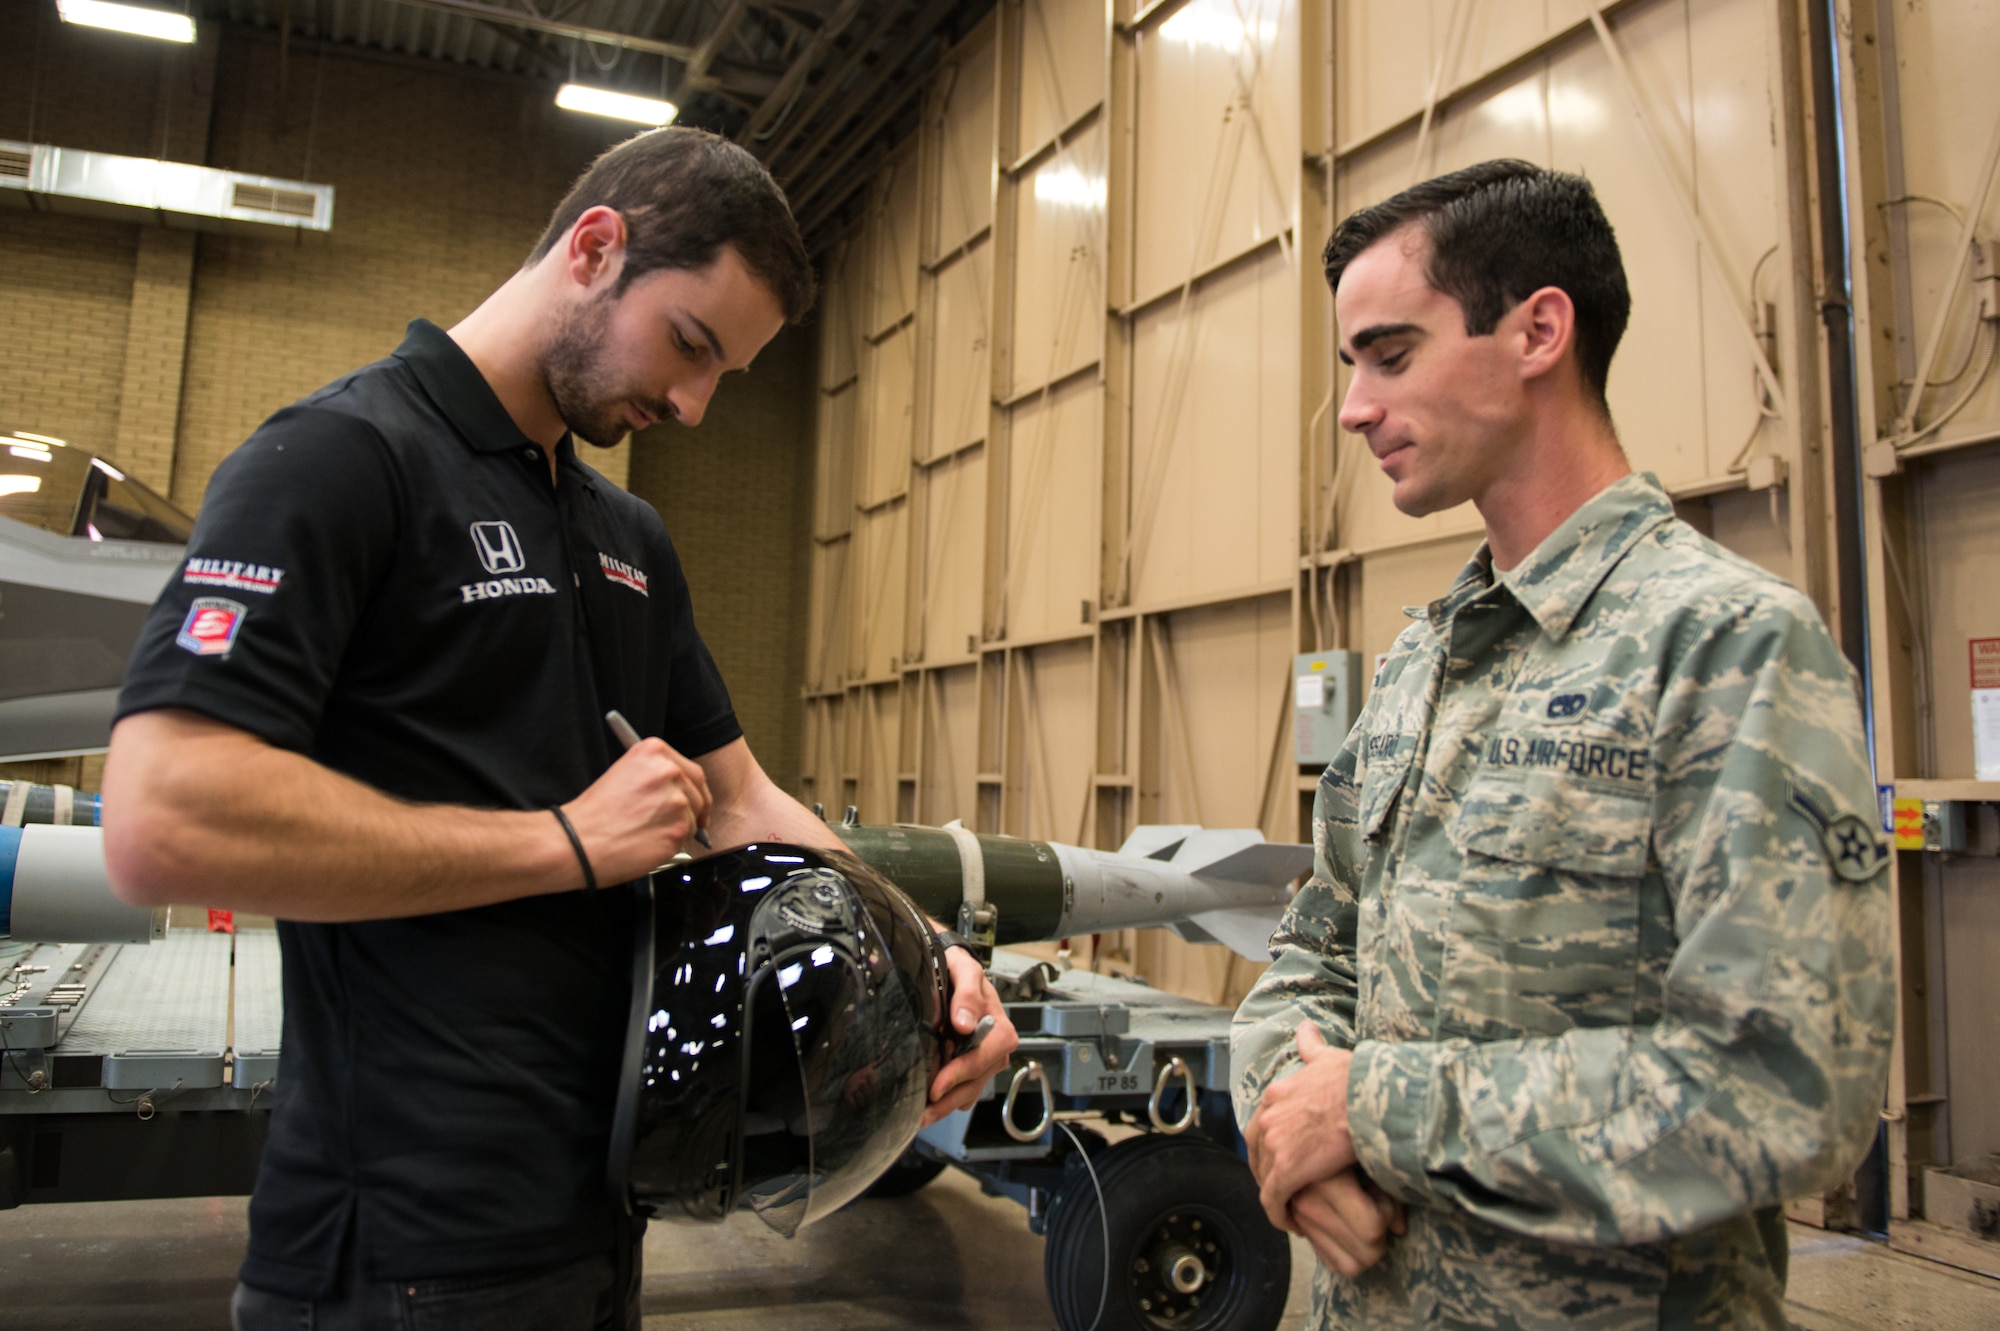 Alexander Rossi, Andretti Autosport team race car driver, autographs a helmet during his visit to Luke Air Force Base, Ariz., April 5, 2018. The Andretti Autosport team visited various units around base to gain insight on the mission of Luke and its Airmen. (U.S. Air Force photo by Airman 1st Class Alexander Cook)